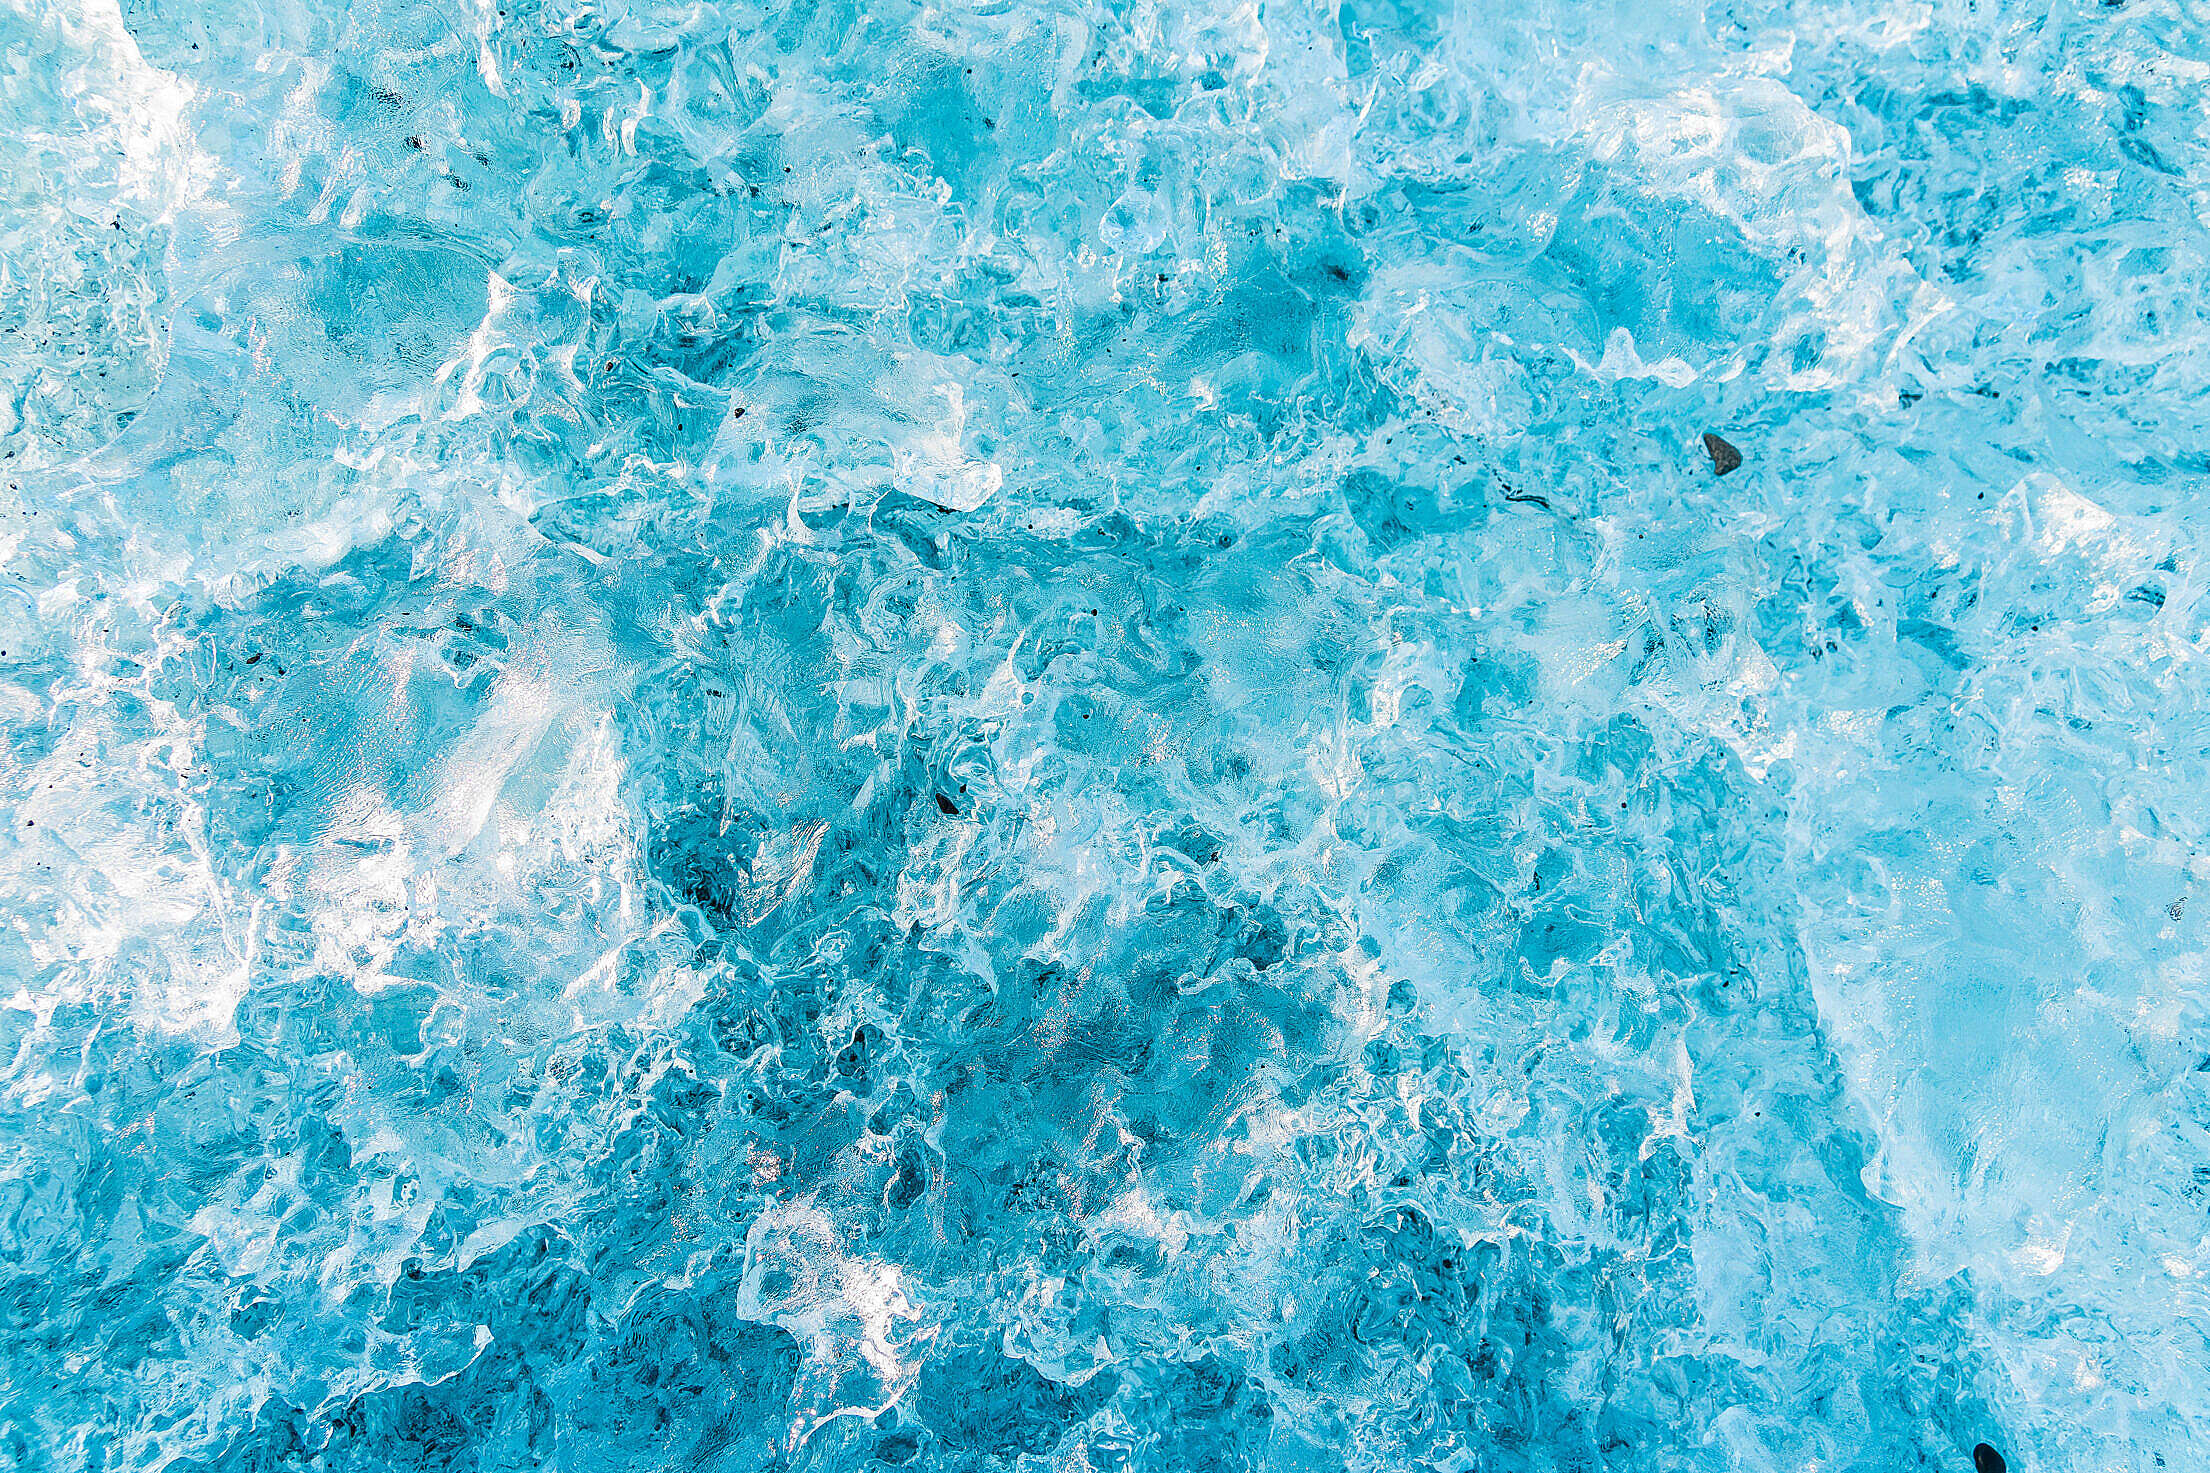 Detail of a Crystalline Glacier in Iceland Free Stock Photo